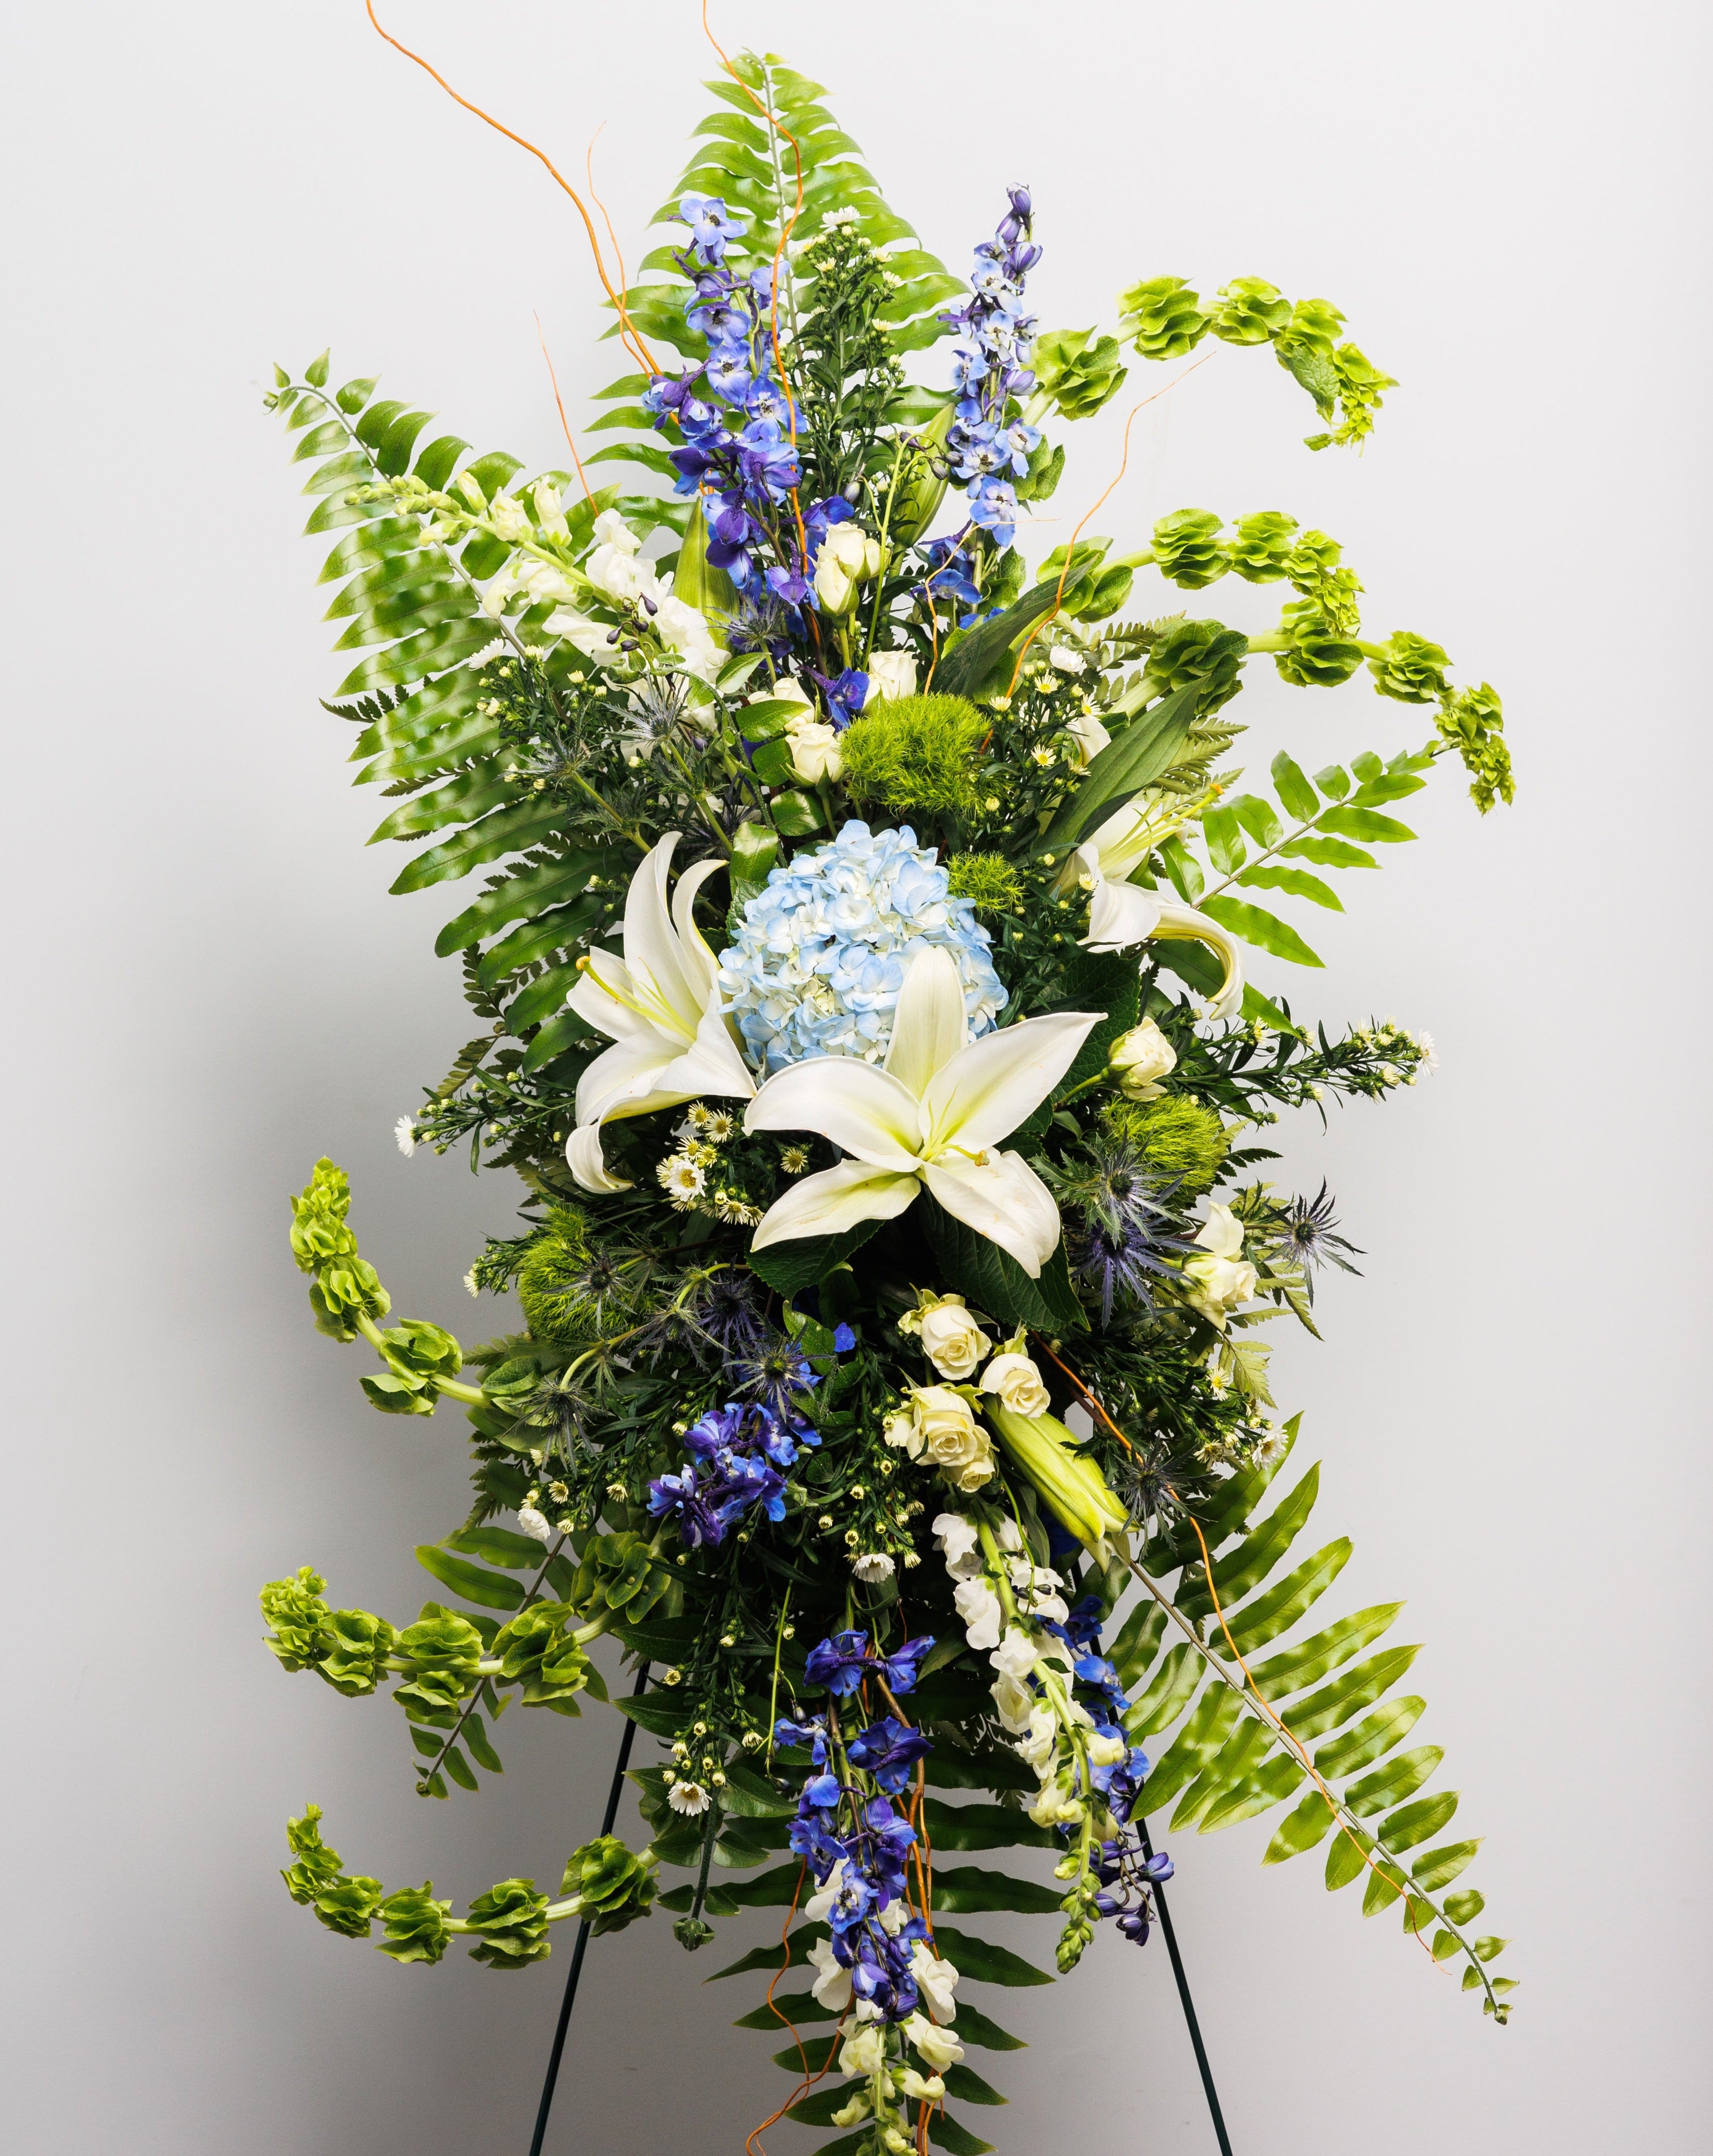 A standing spray with white lilies, blue hydrangea, bells of Ireland and blue delphinium.